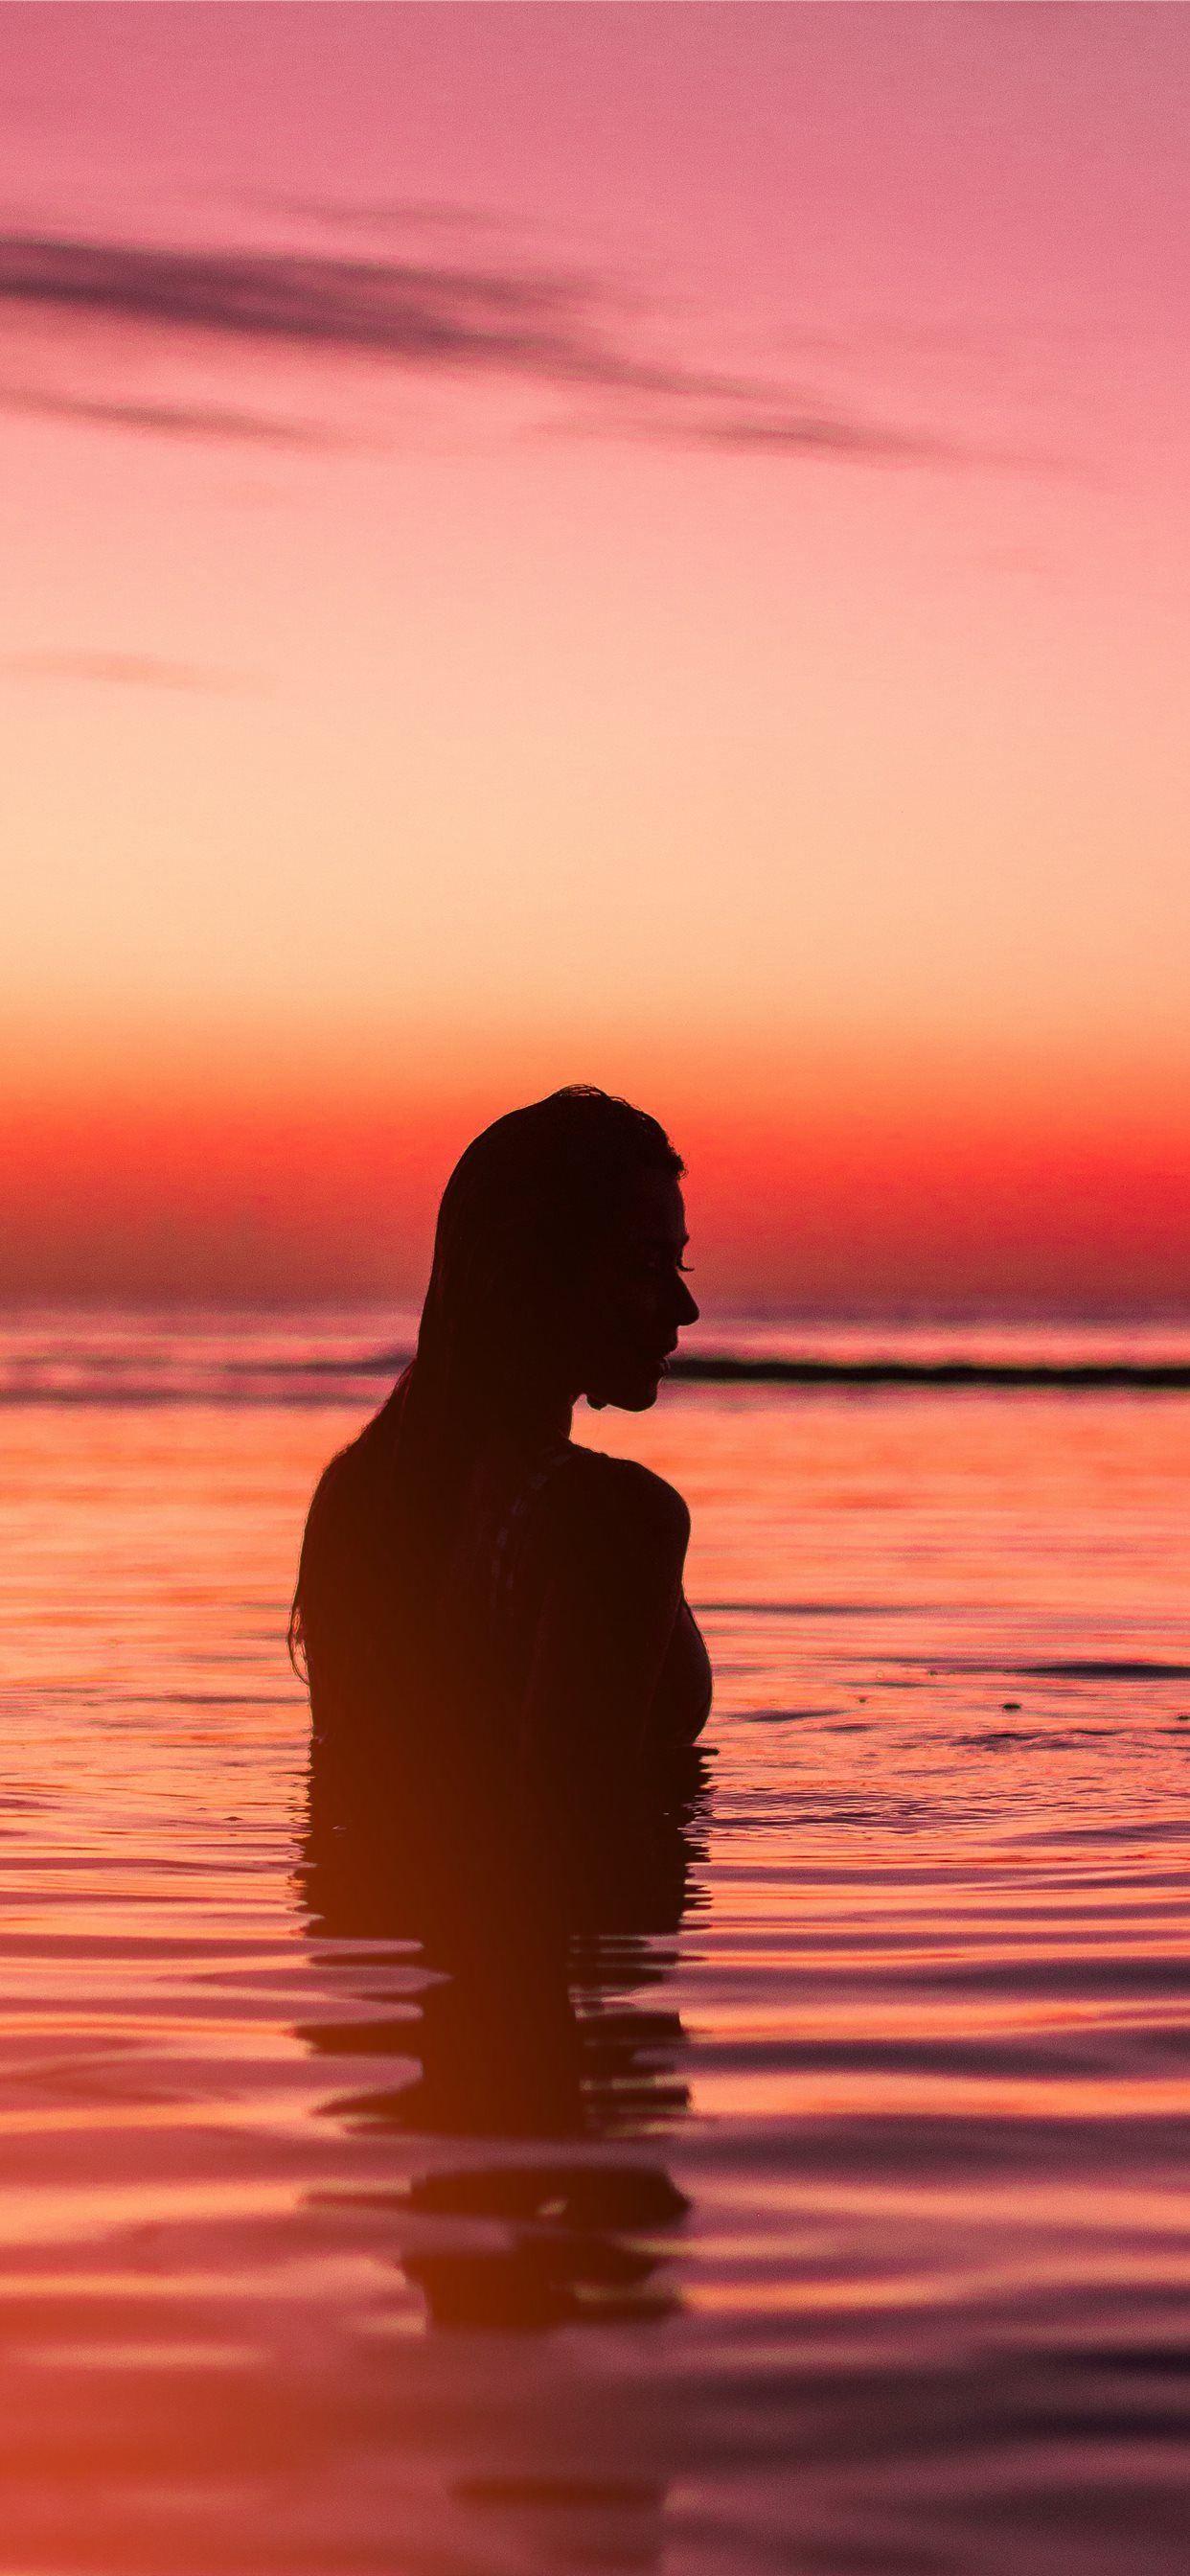 silhouette of woman in body of water iPhone X Wallpaper Free Download